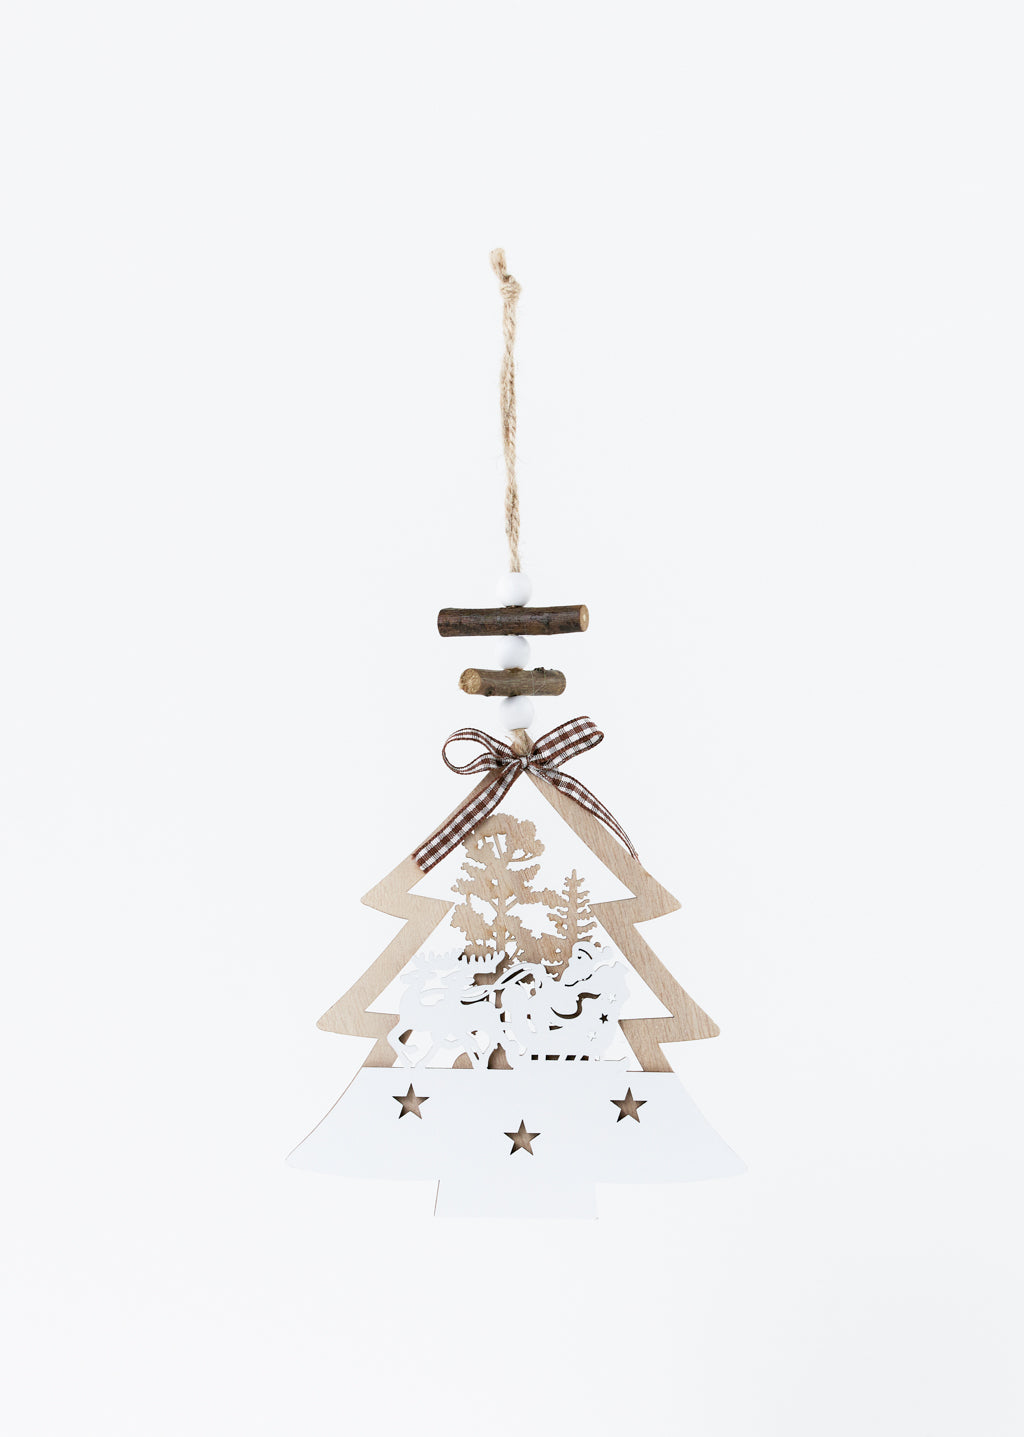 Suspended Tree Ornament